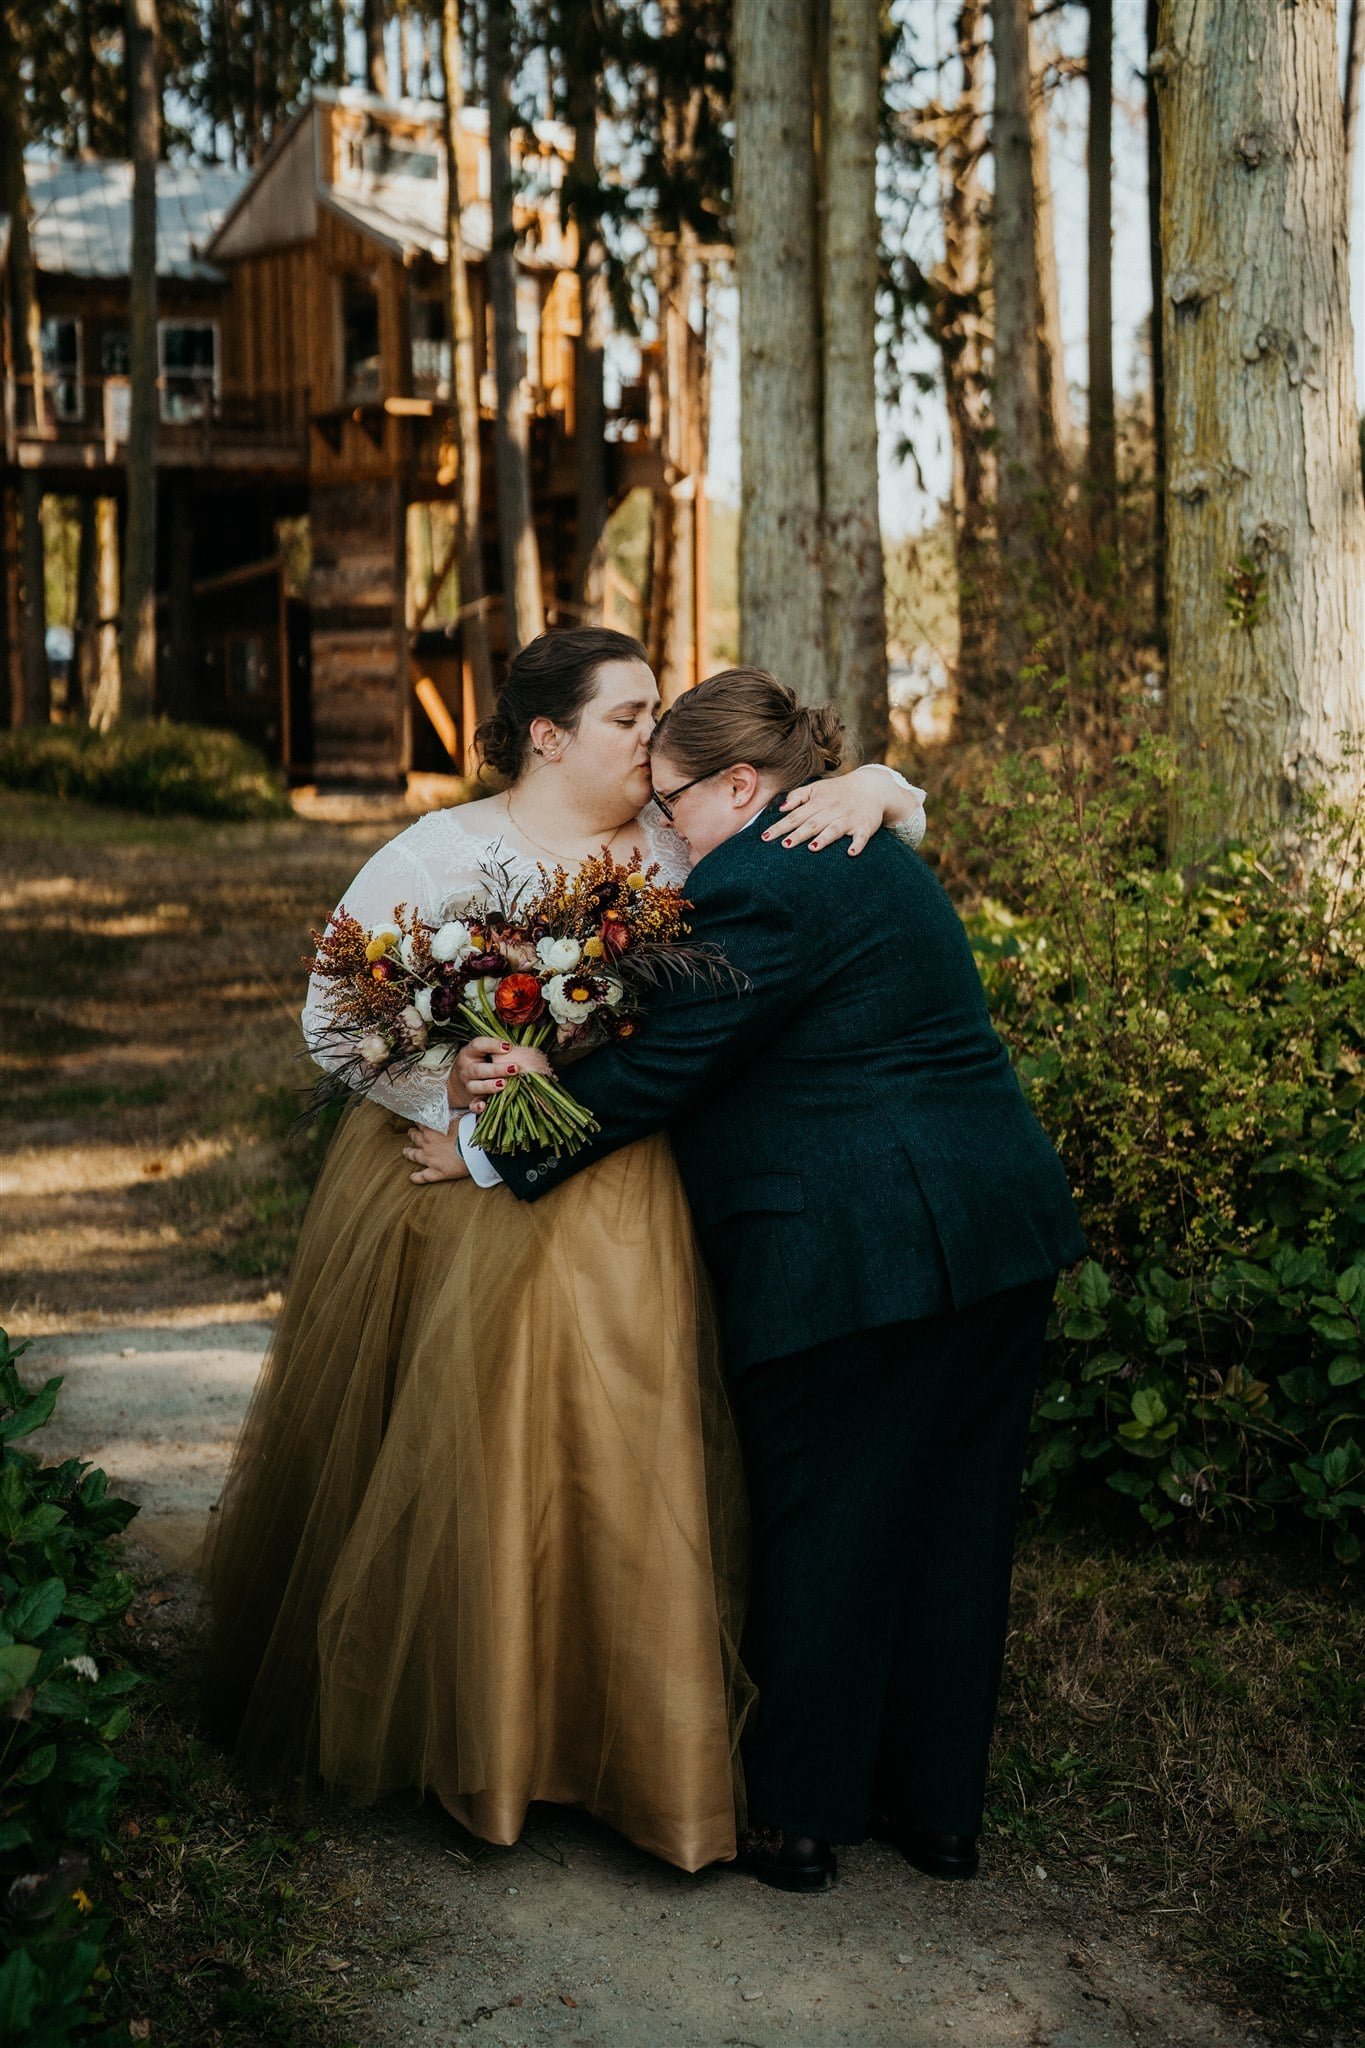 Brides hug and get emotional after first look in the forest in Olympic National Park